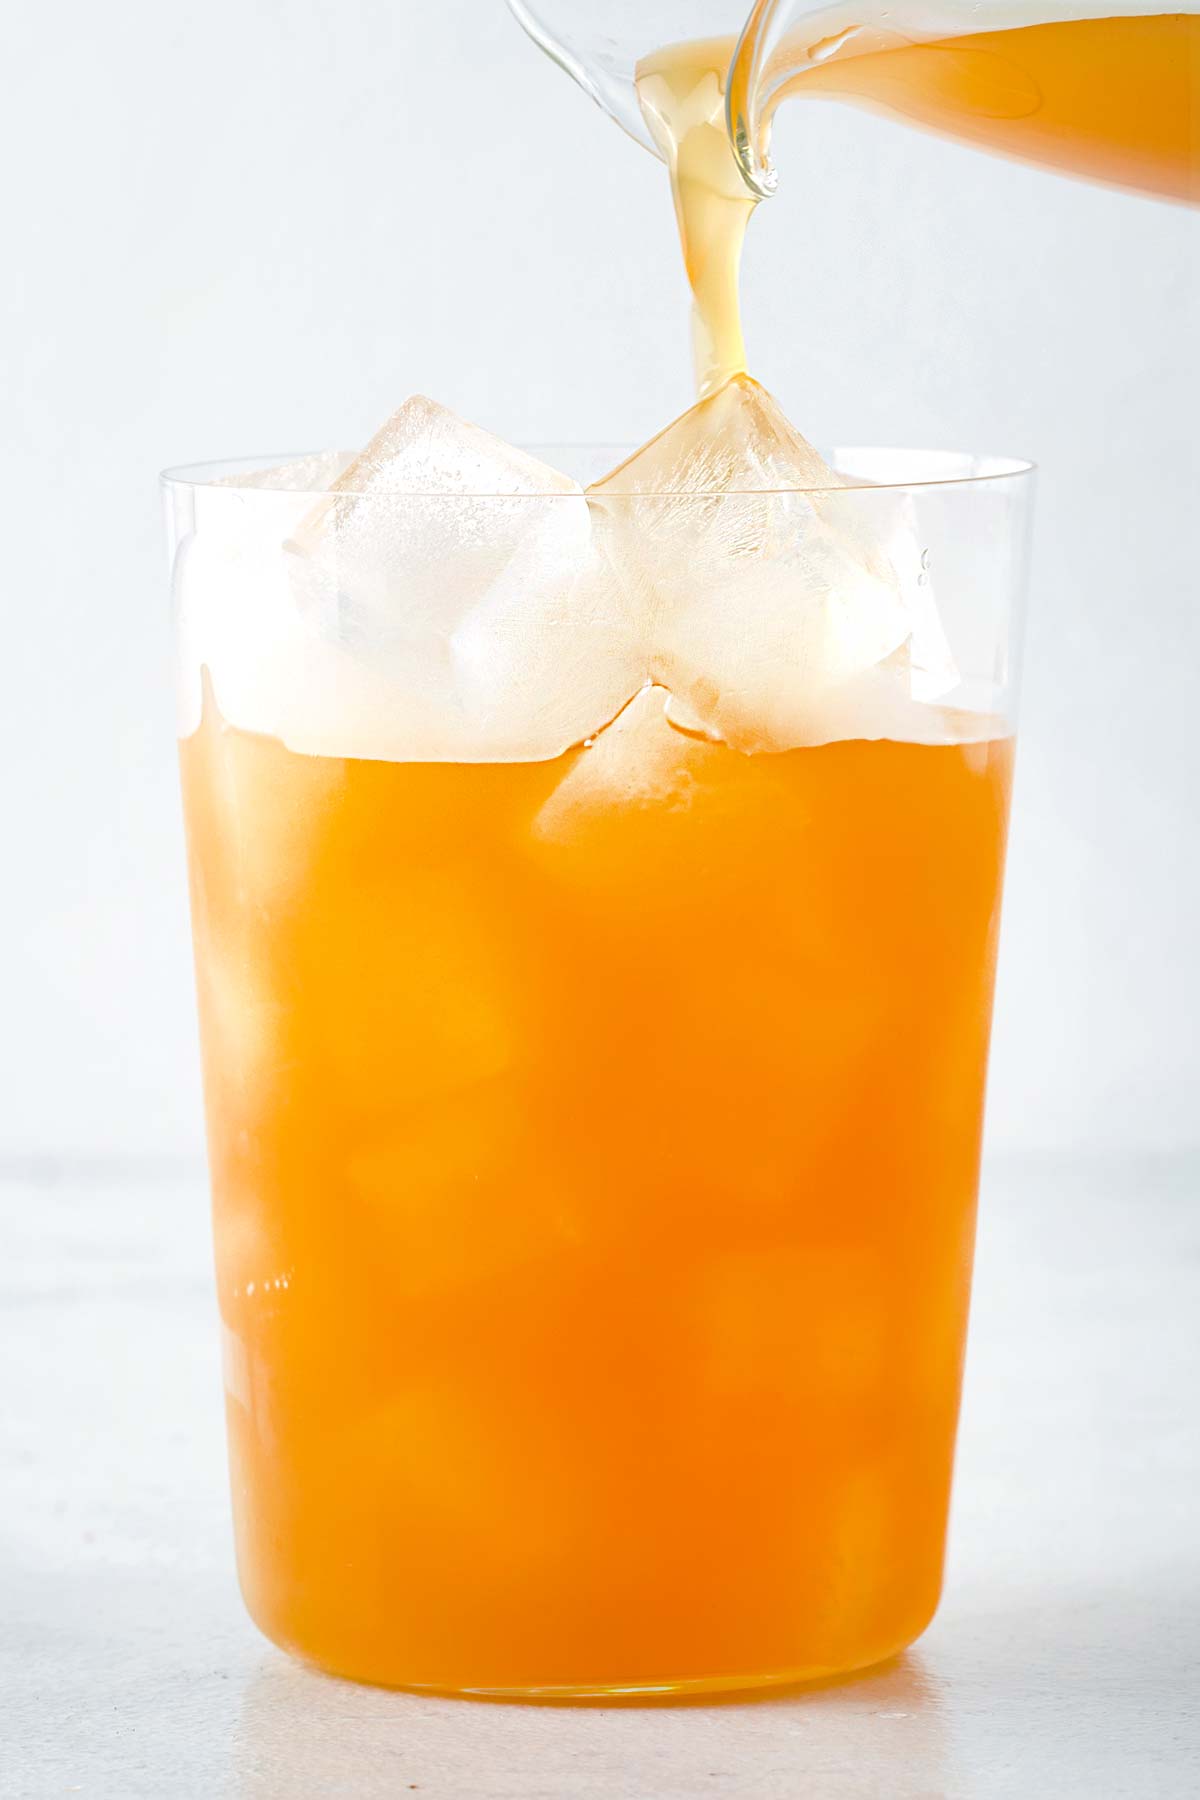 Mango Iced Tea being poured into clear cup filled with ice.